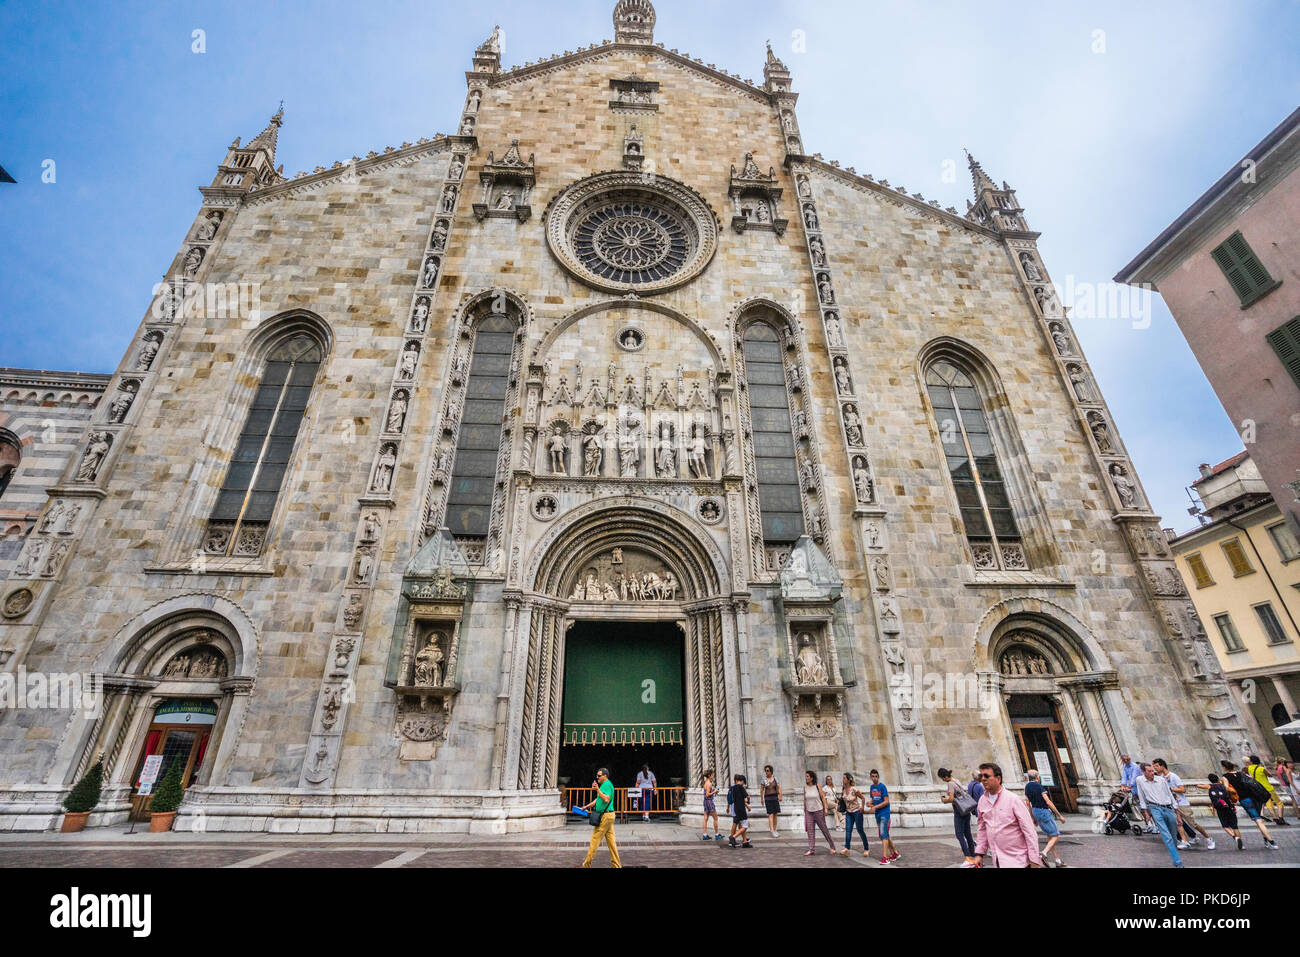 the imposing facade of Como Cathedral with prominent Rose Window, seen from Piazza del Duomo in Como, Lombary, Italy Stock Photo